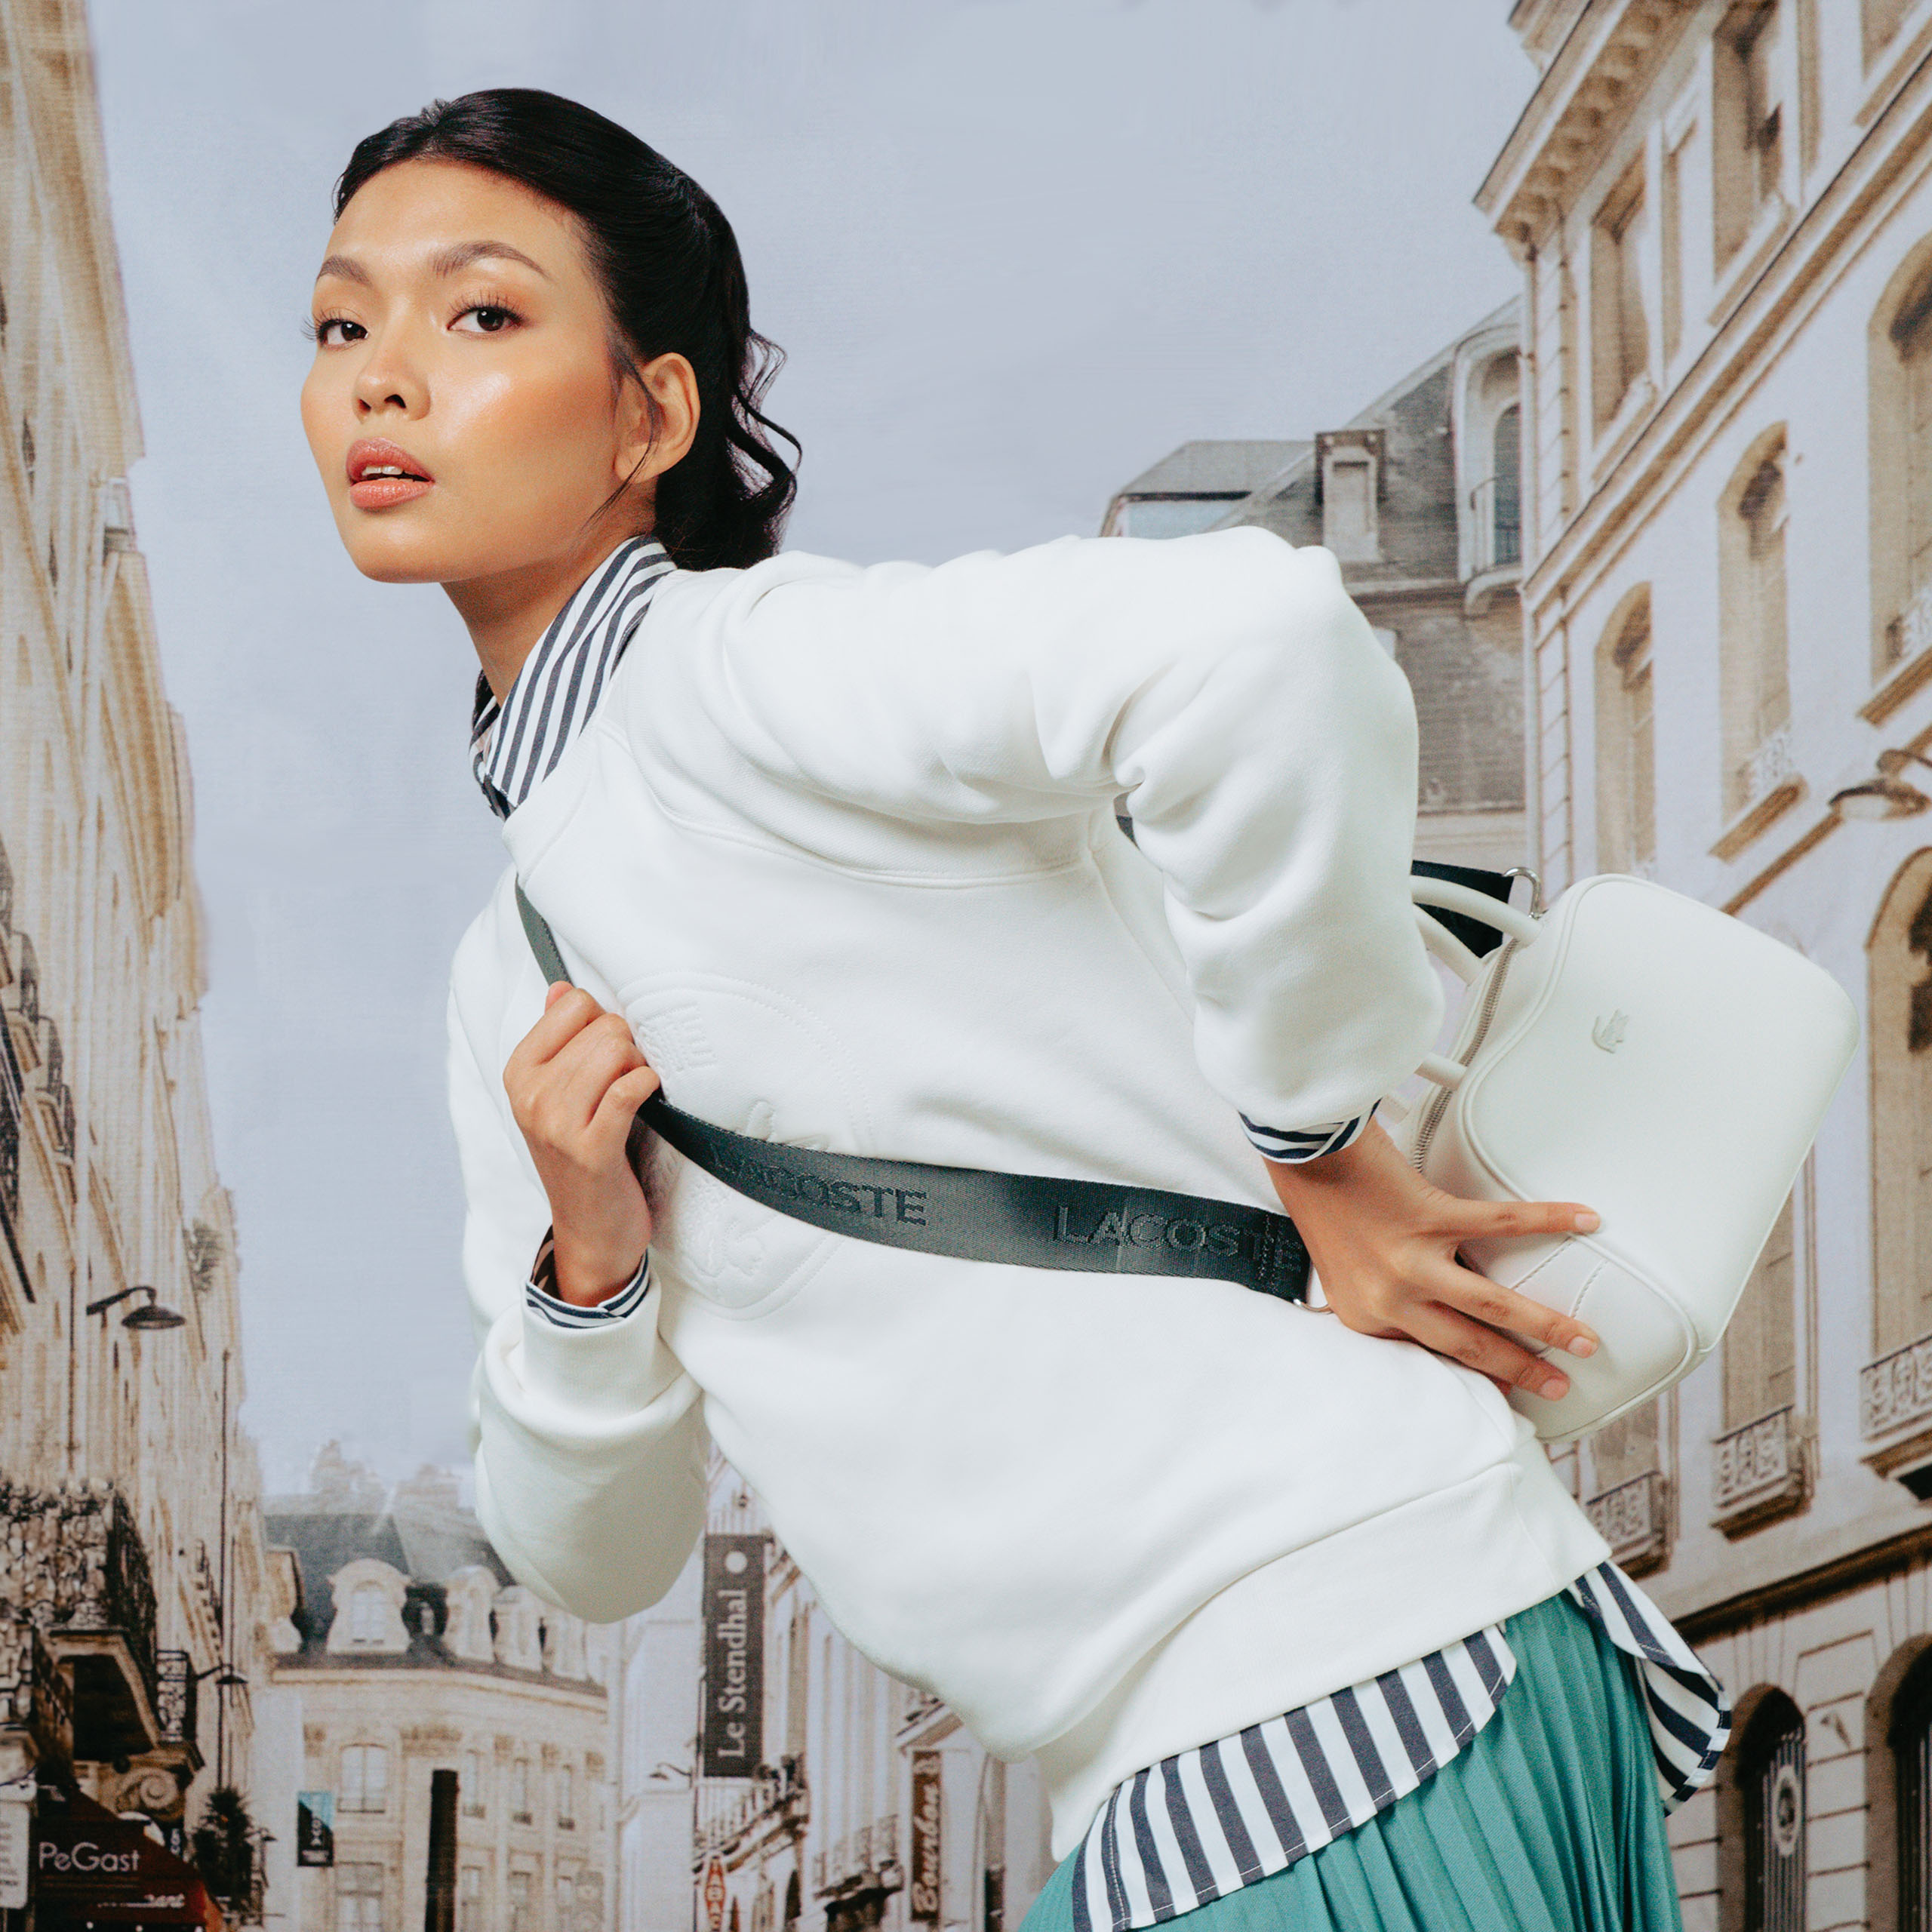 A Modern Curve: Lacoste's Newest Bag is An Ode to Sports Heritage and Femininity